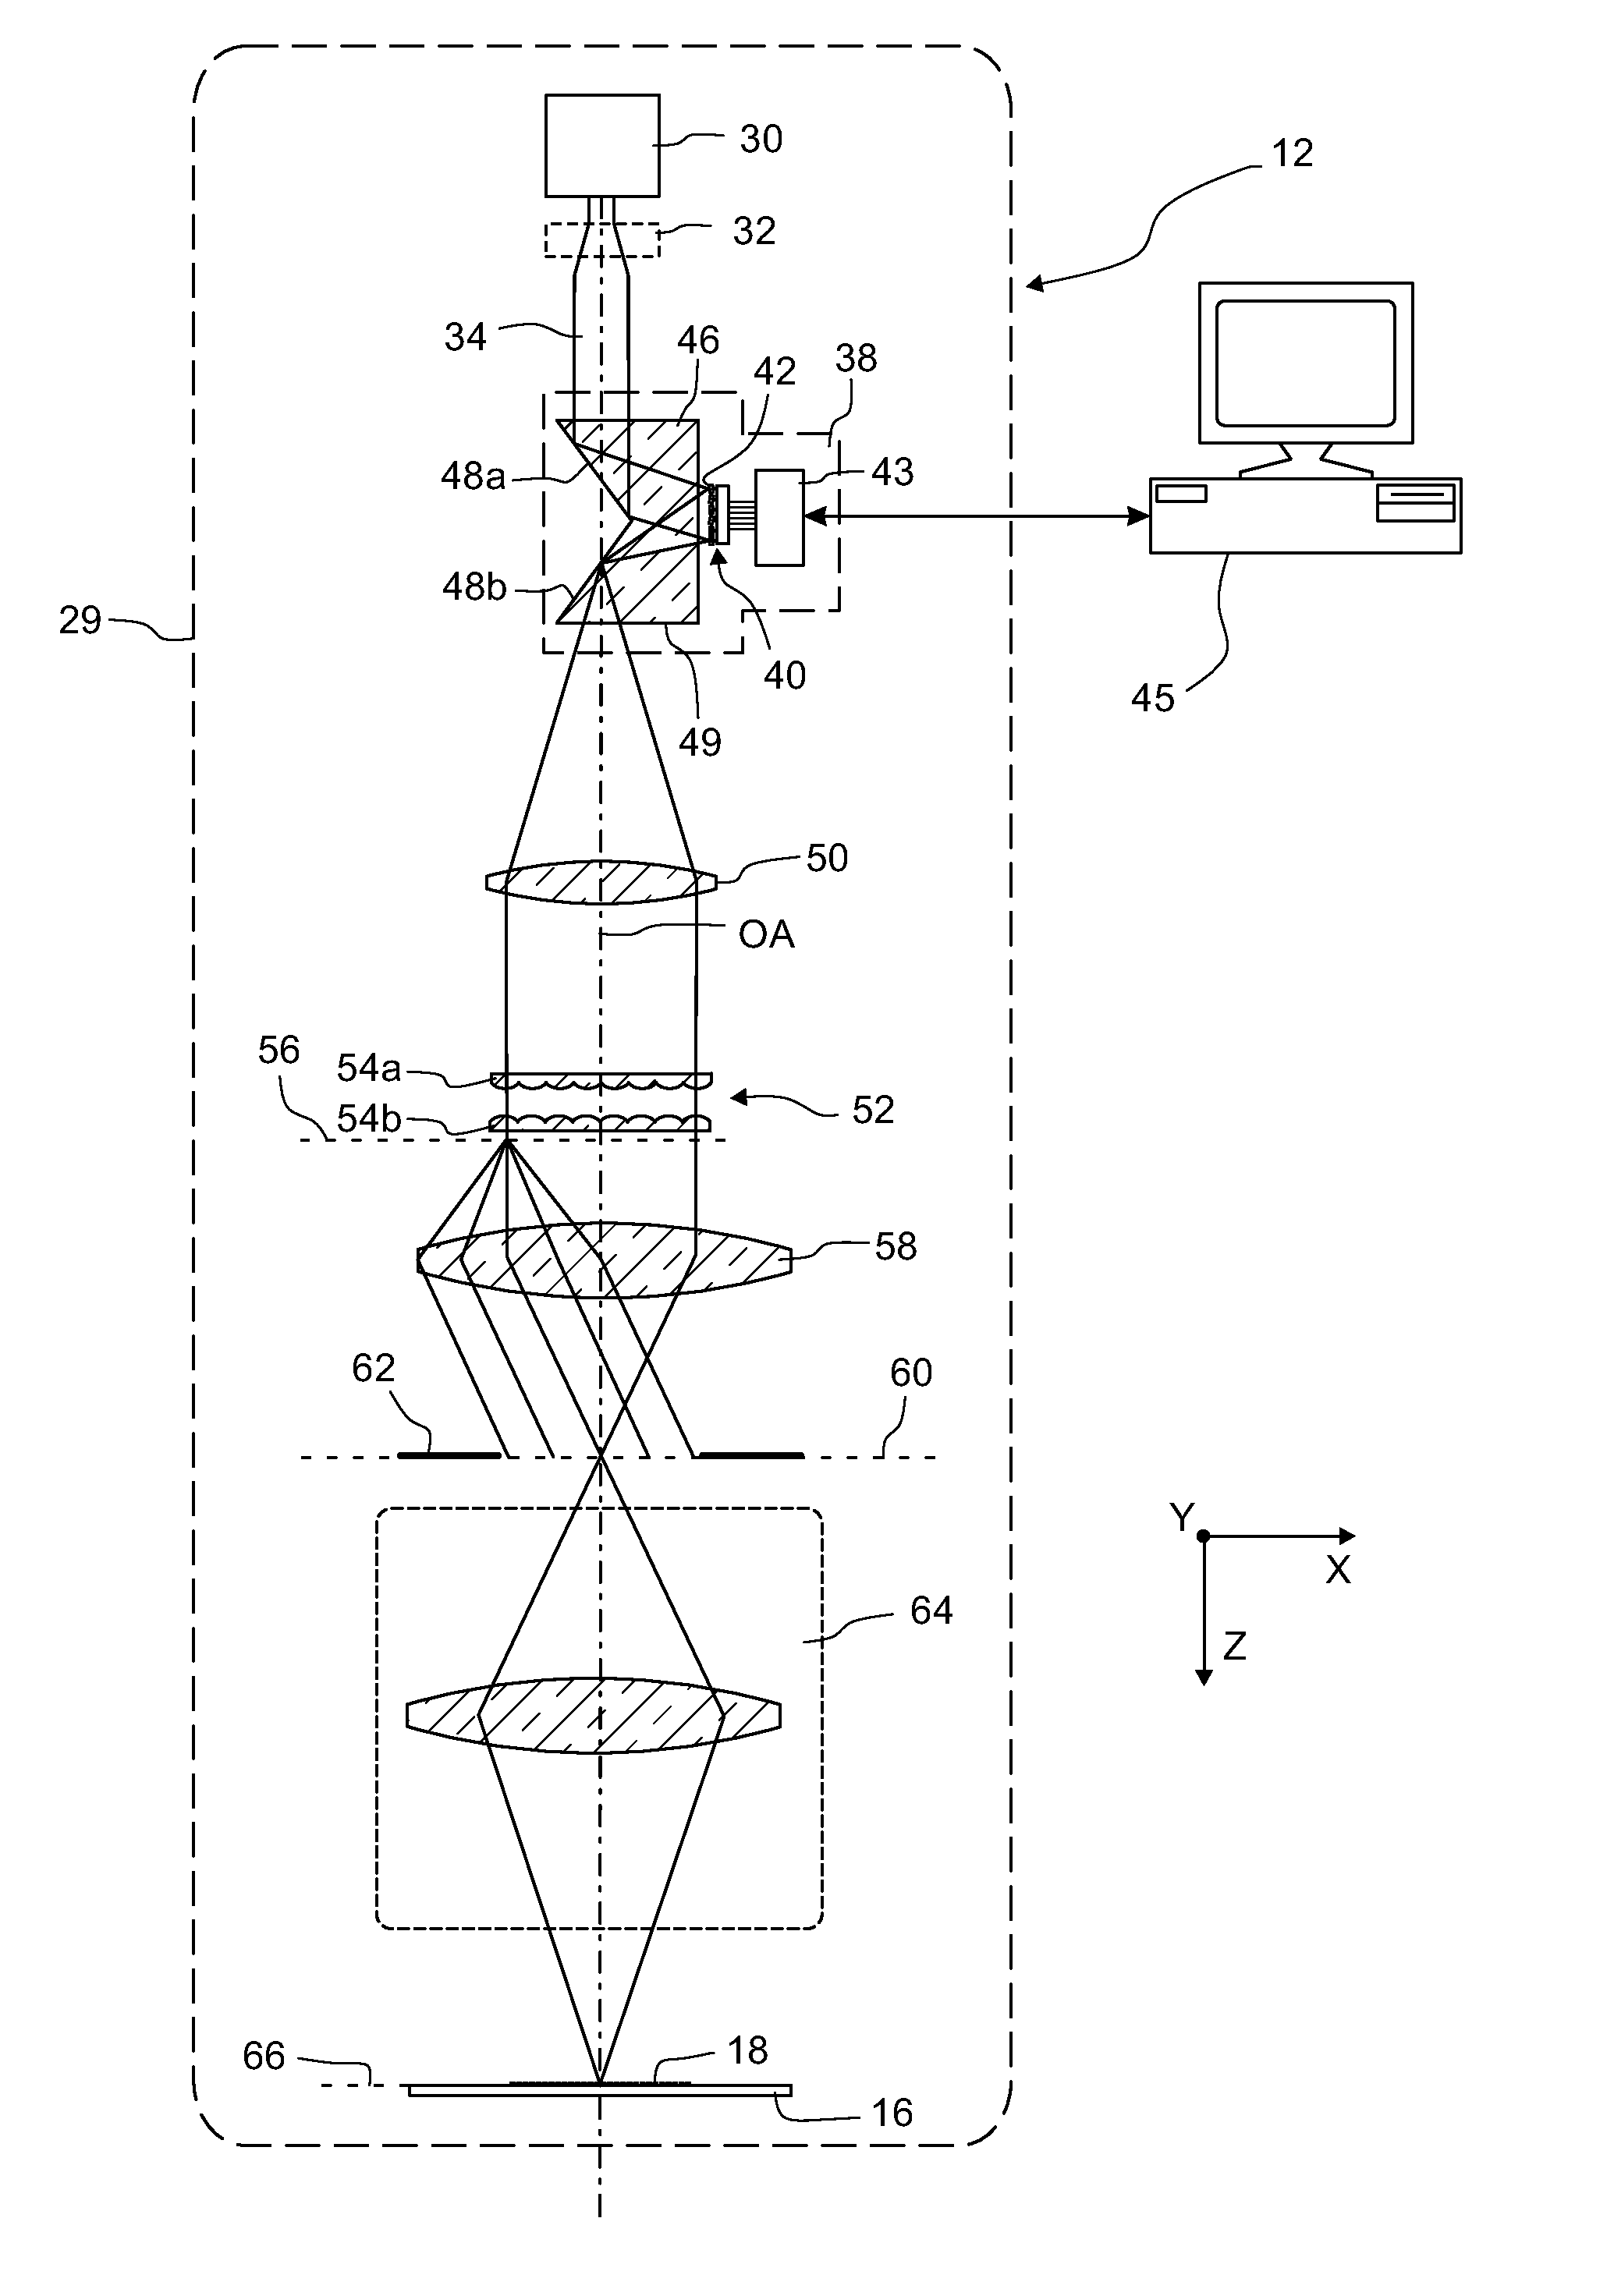 Light modulator and illumination system of a microlithographic projection exposure apparatus